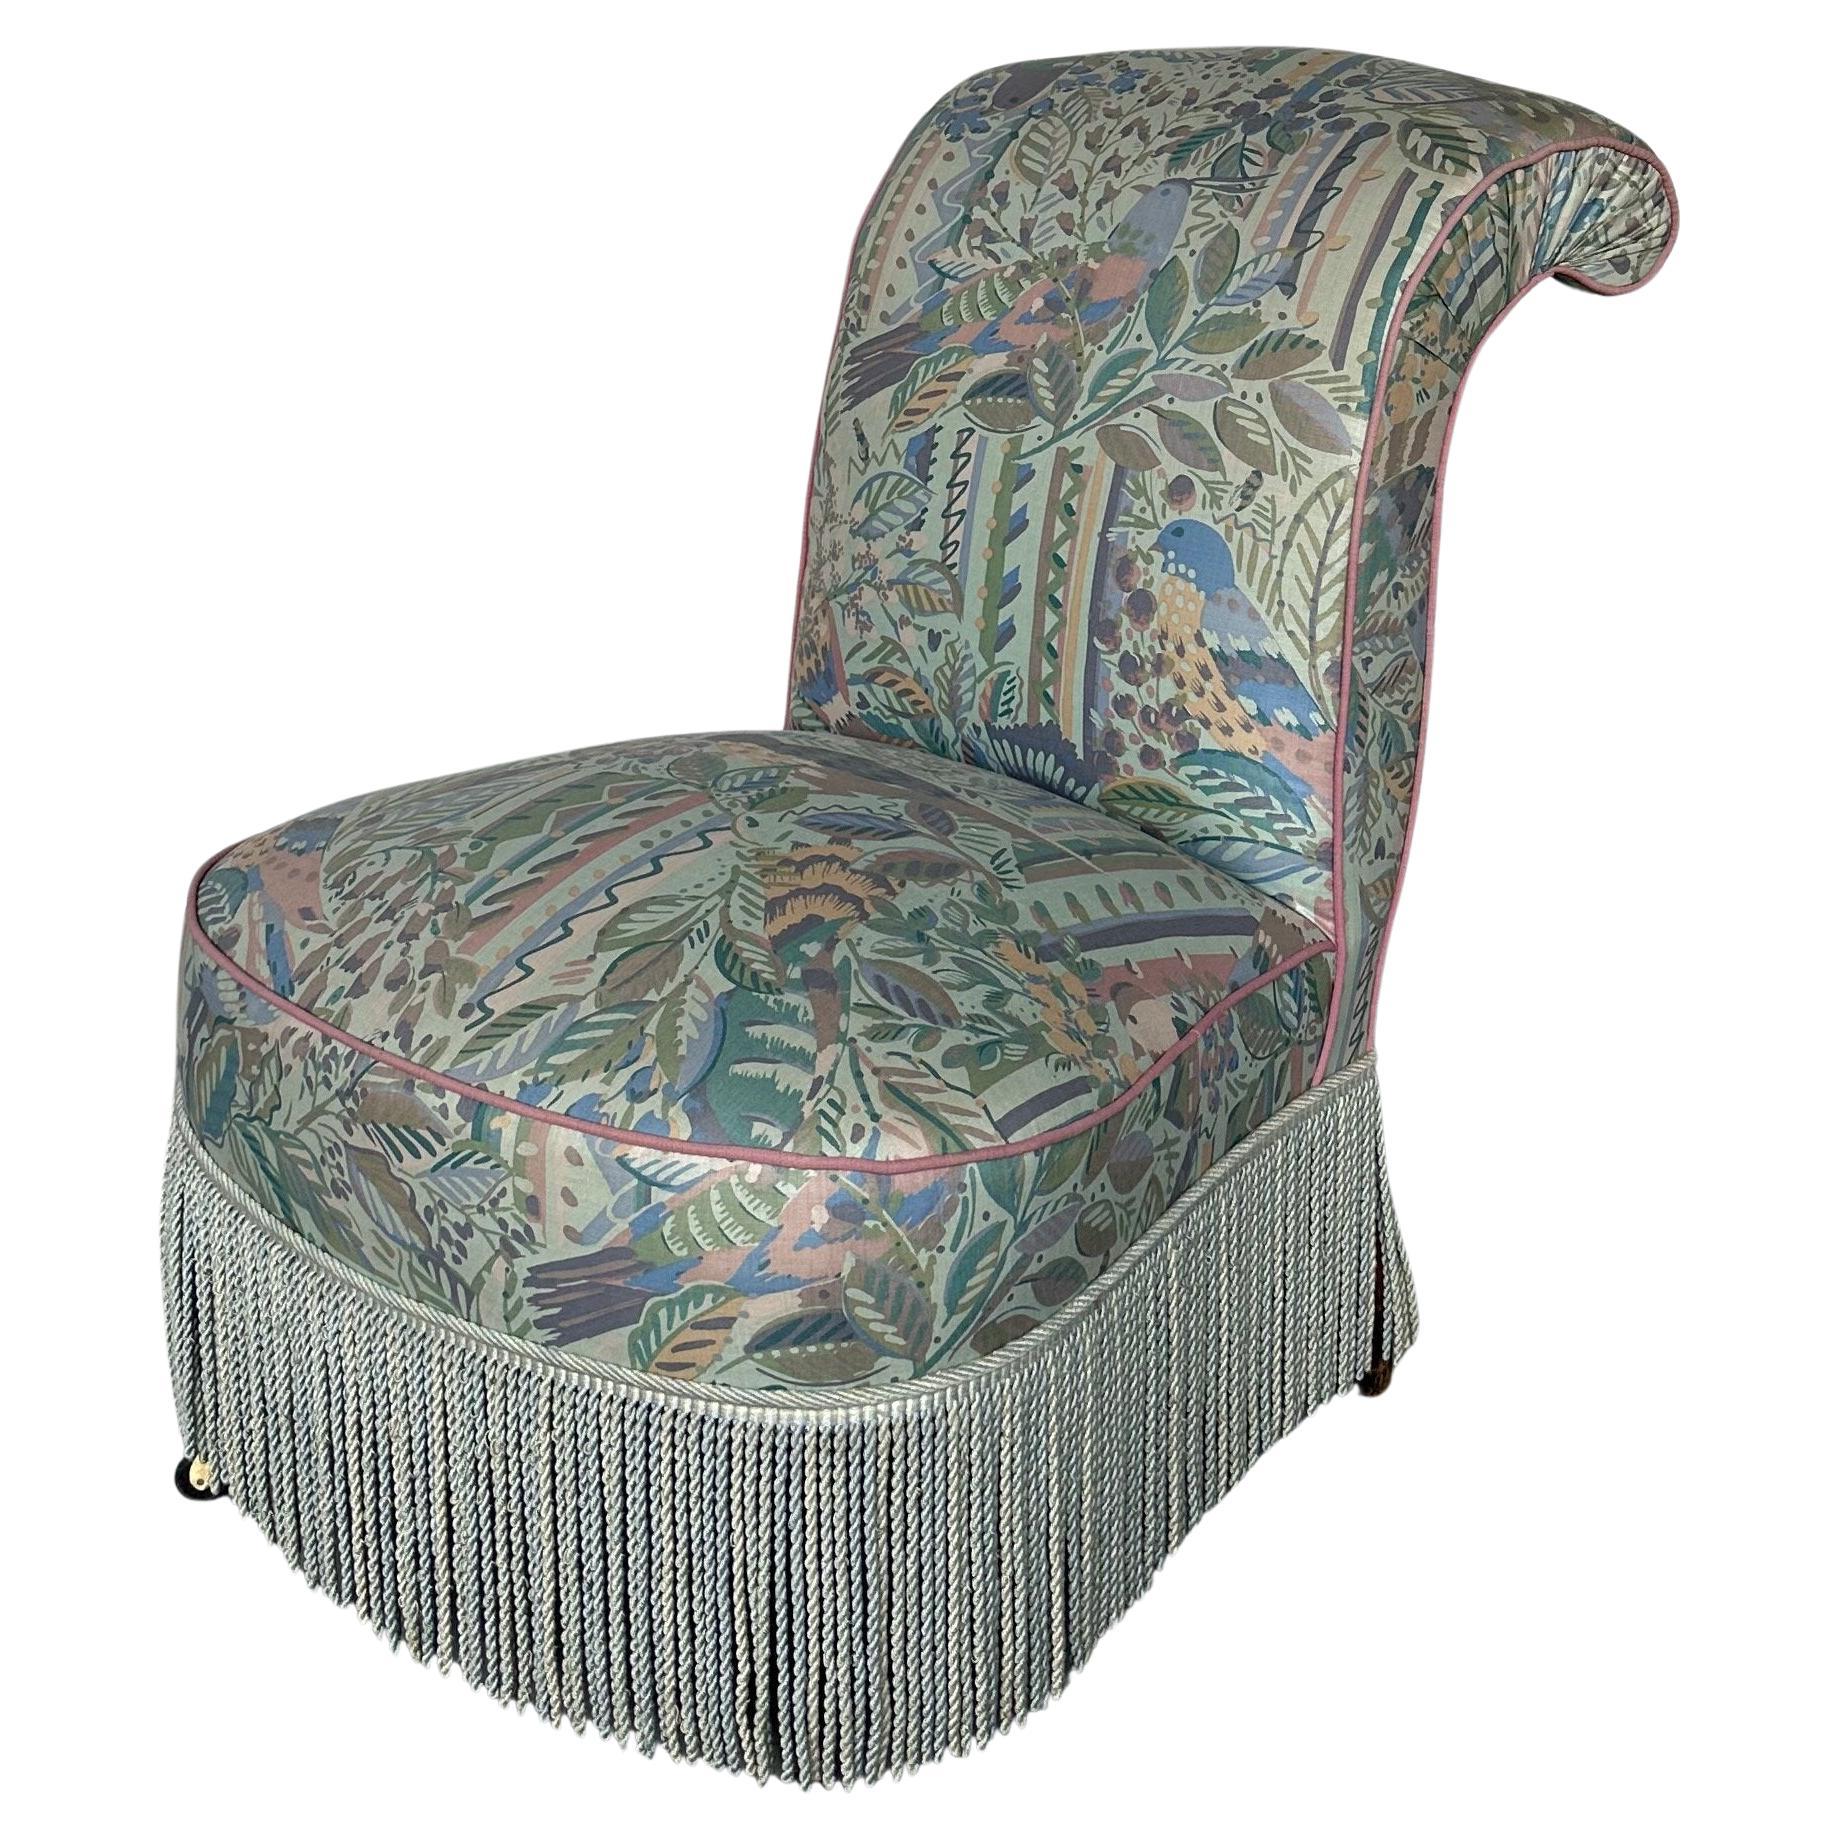 French Scrolled Back Napoleon III Slipper Chair with Fringe